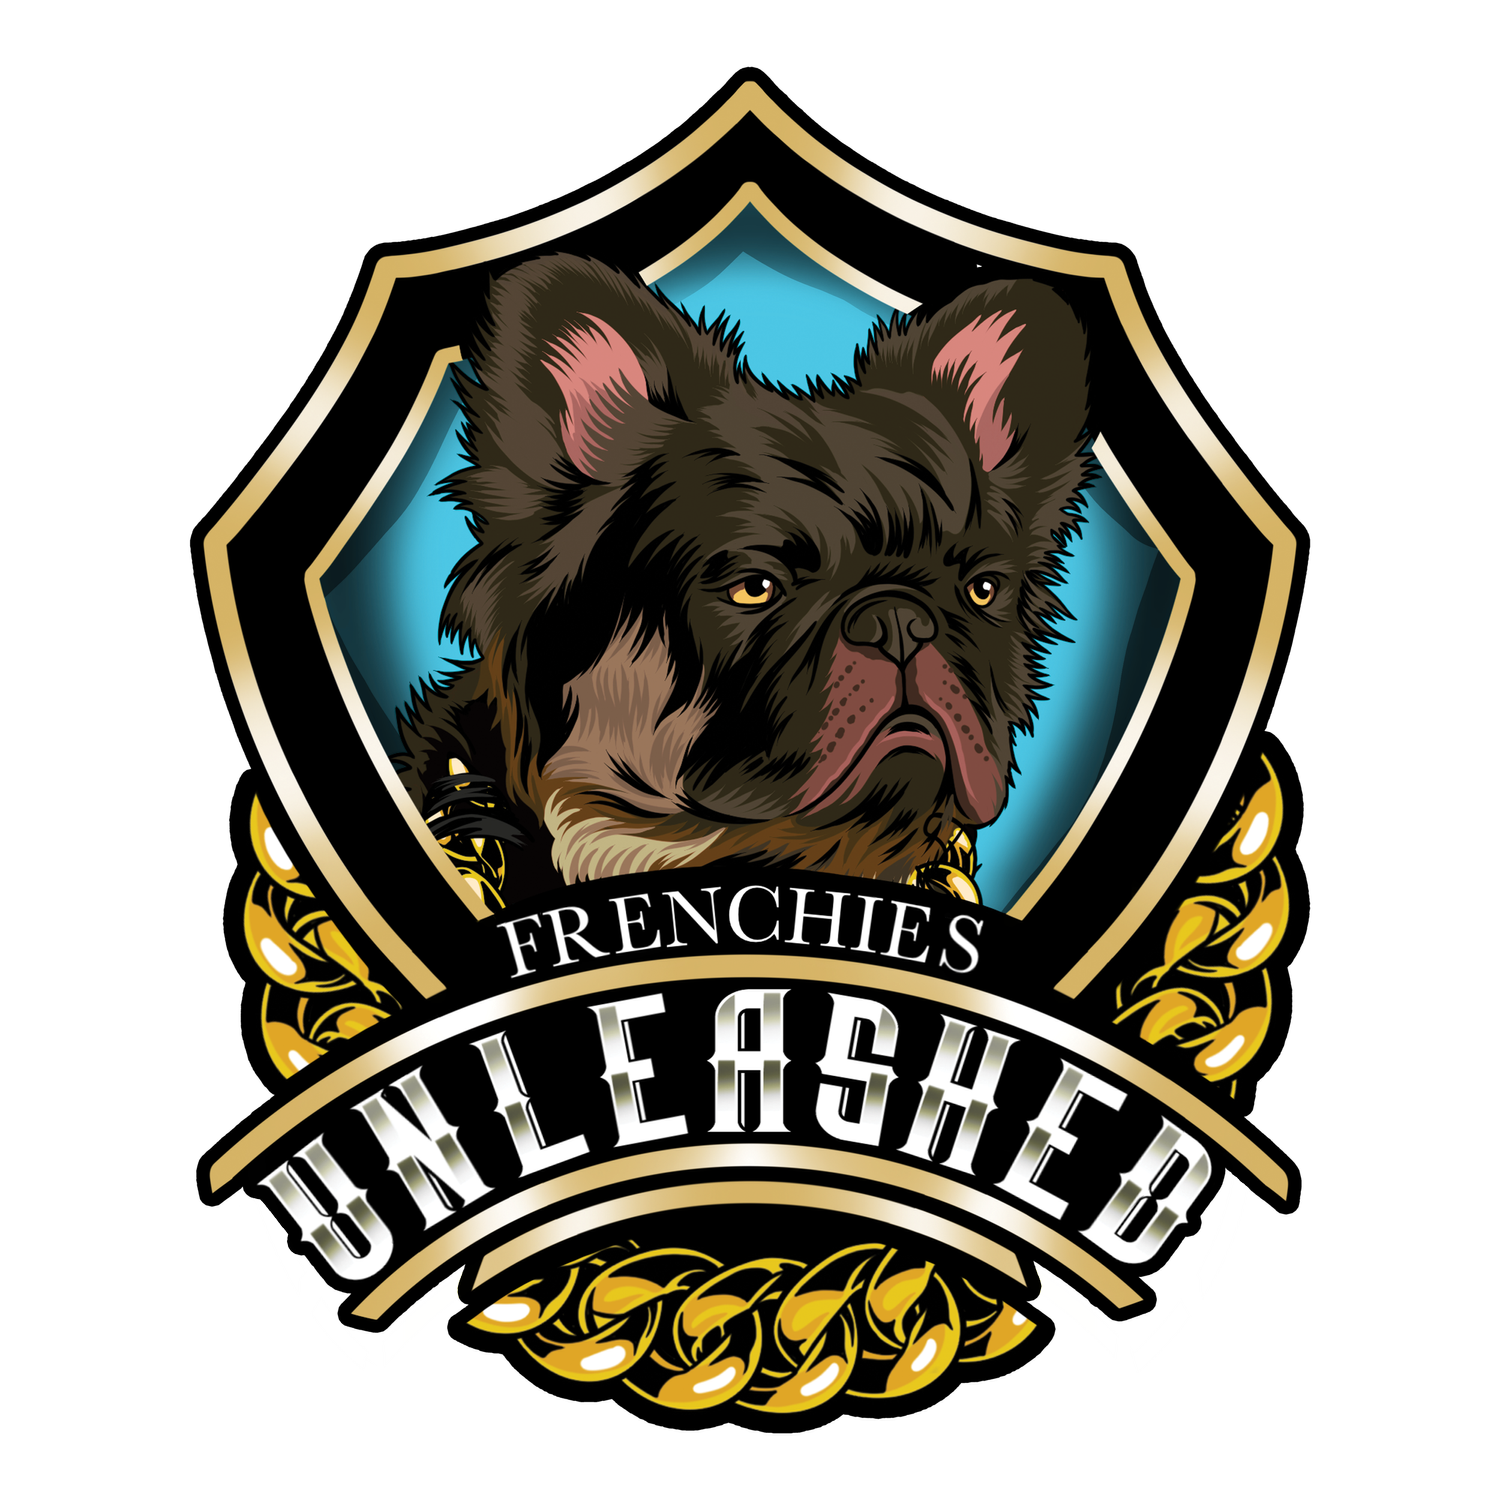 Home of the Fluffy French Bulldogs